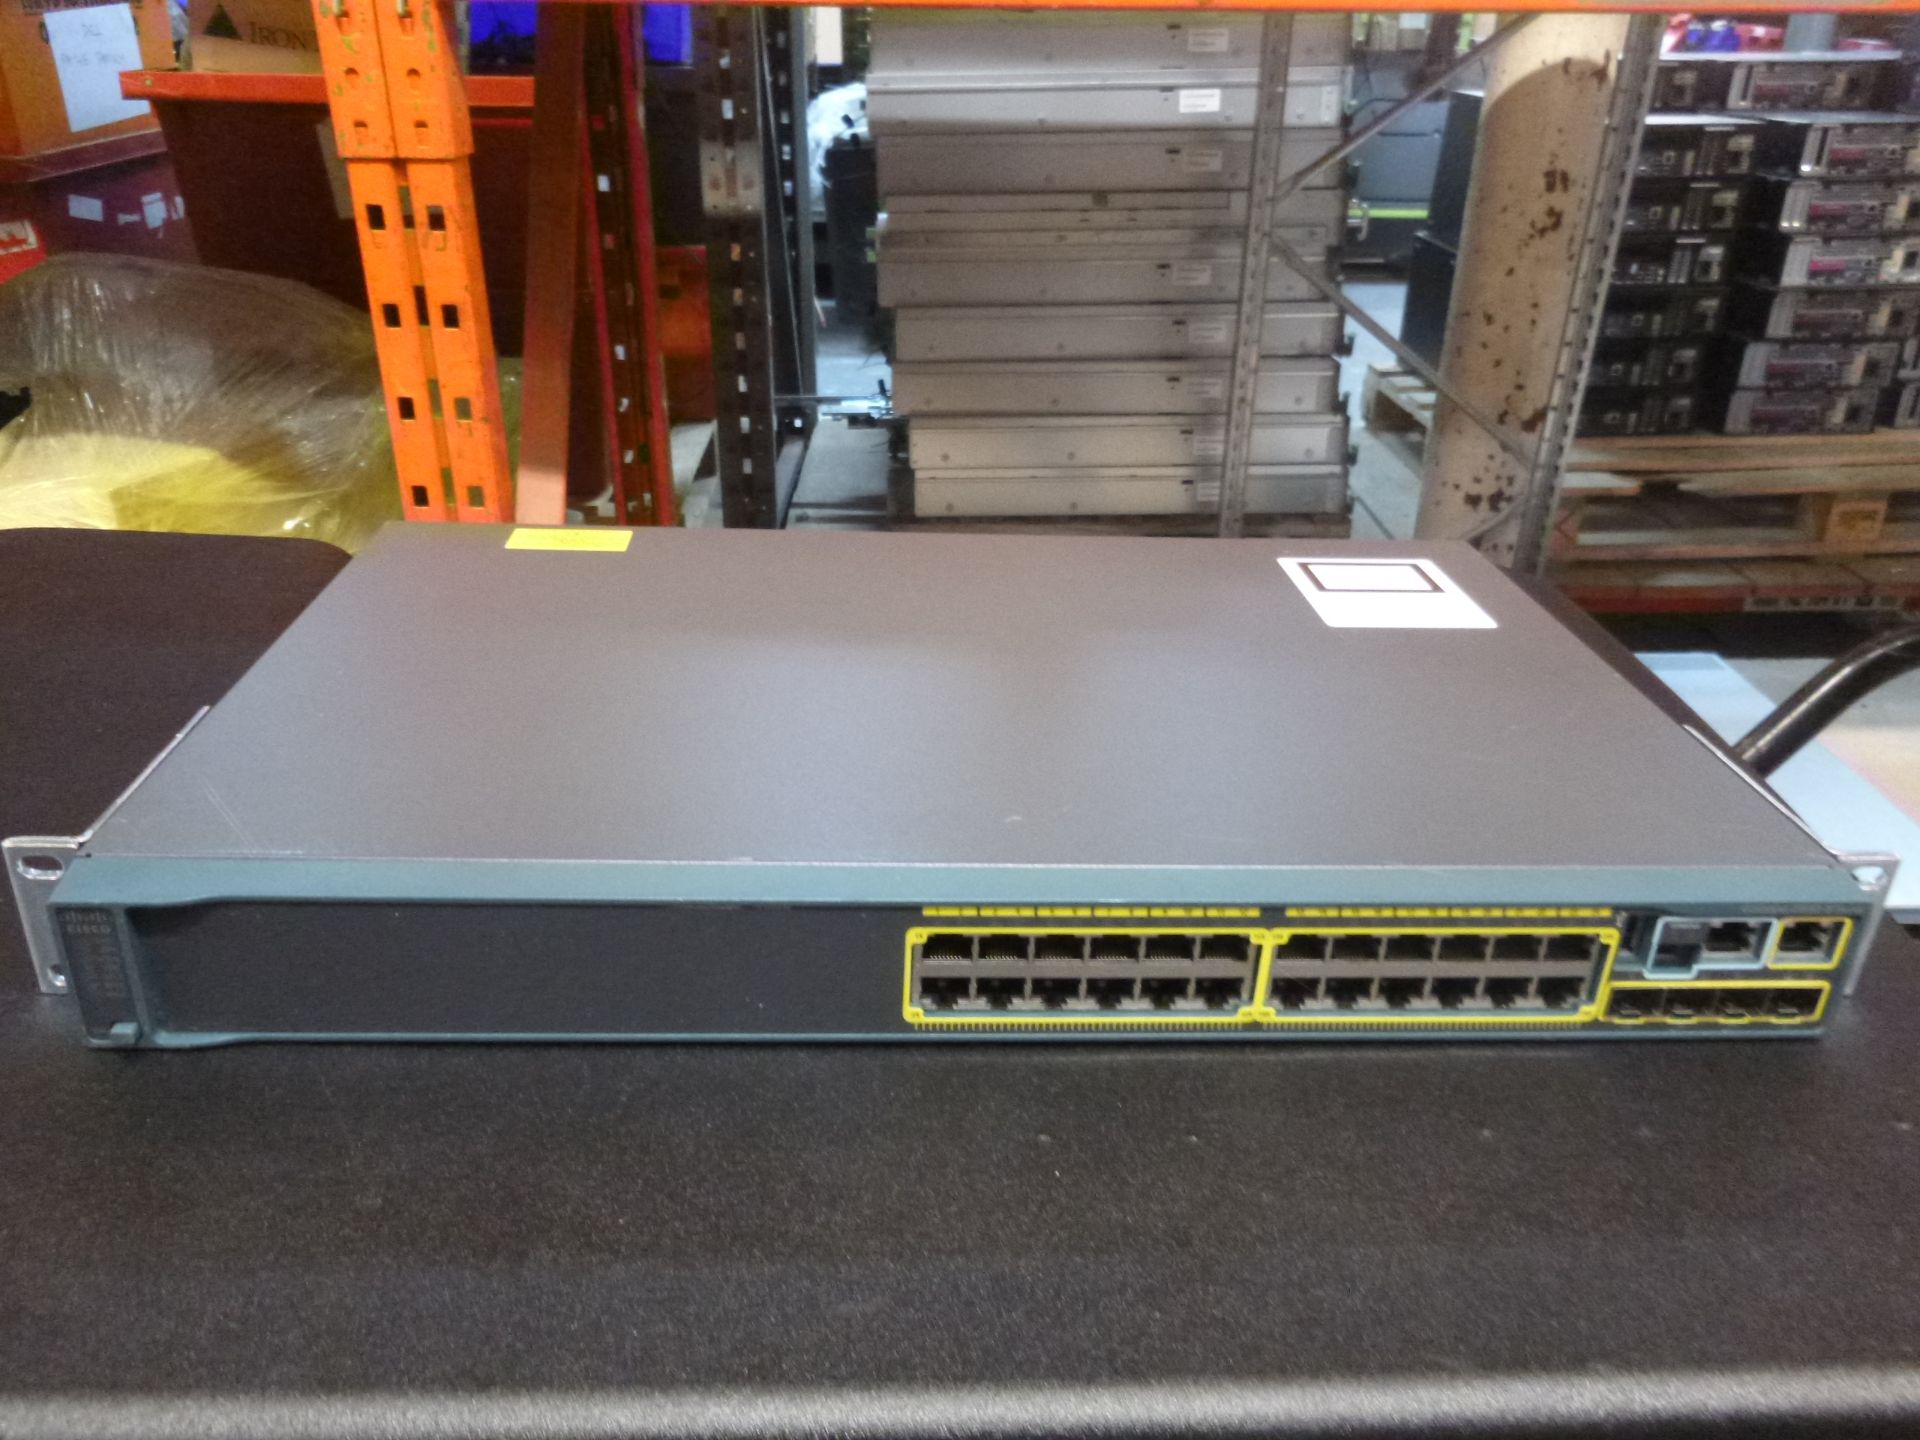 CISCO CATALYST 2960 S SERIES 24 PORT NETWORK SWITCH. MODEL WS-C2960S-24TS-L V05. COMPLETE WITH